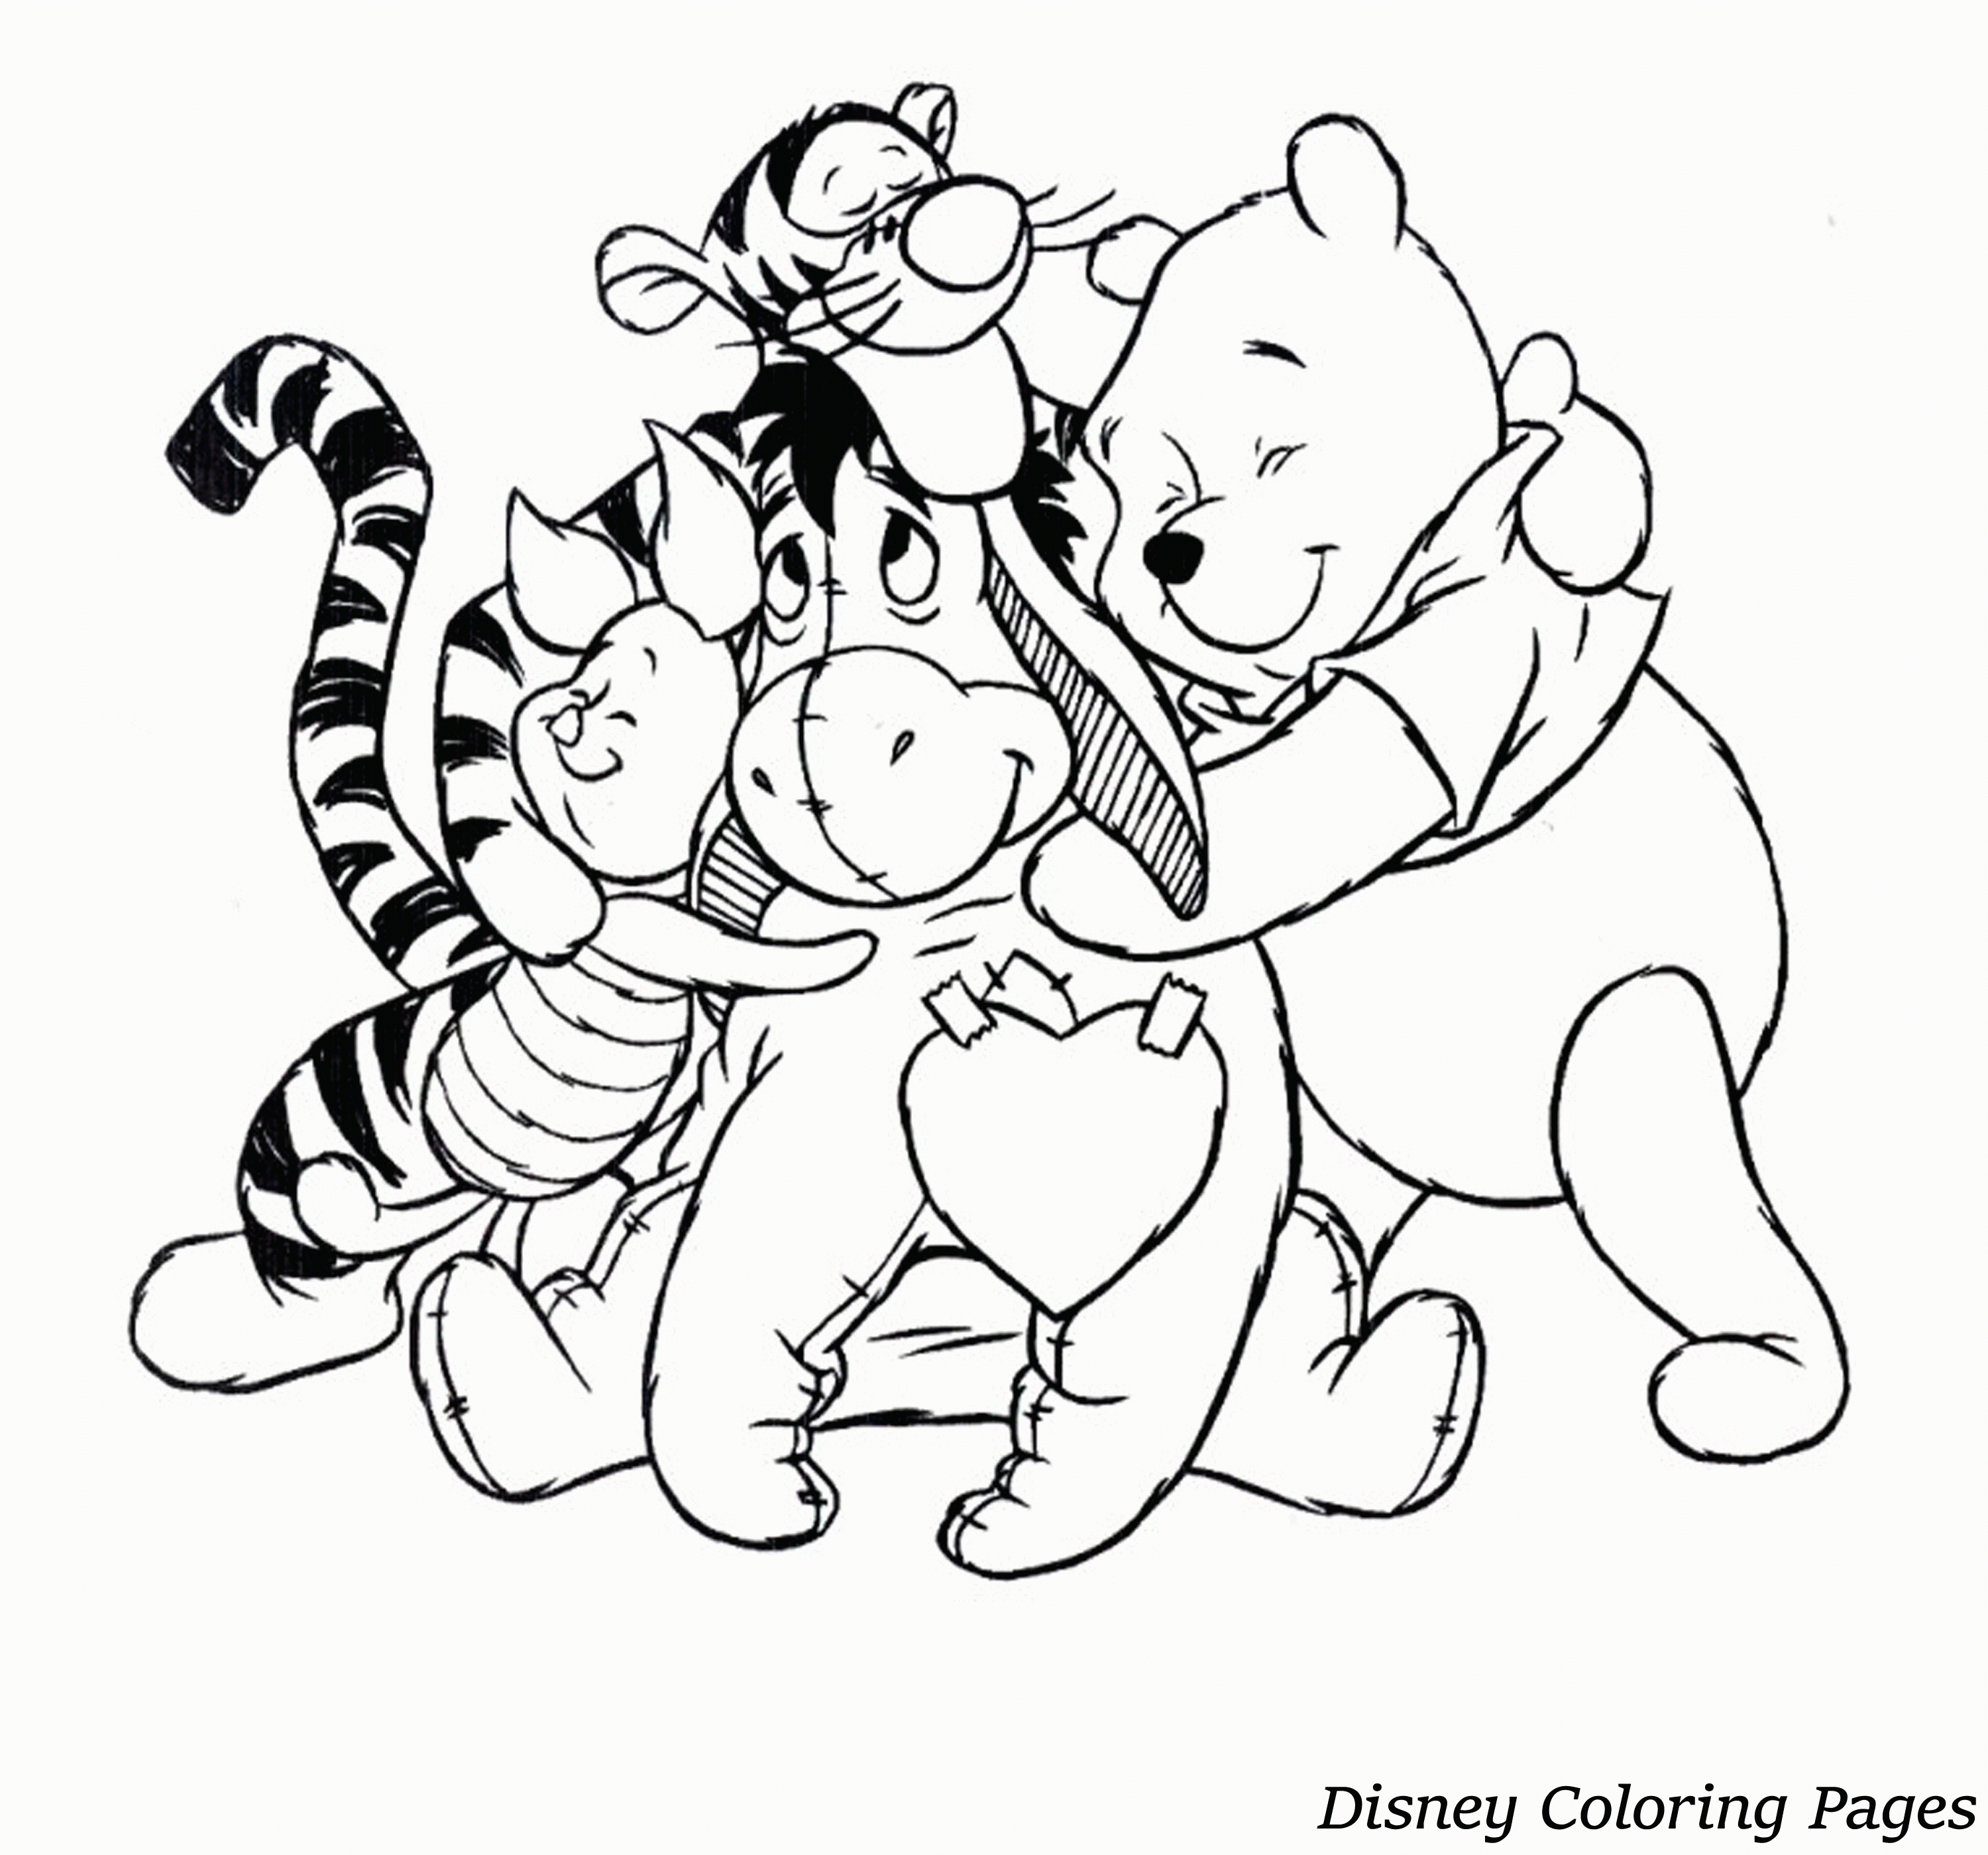 Disney Coloring Pages Pdf - Coloring Home - Free Printable Coloring Pages Of Disney Characters